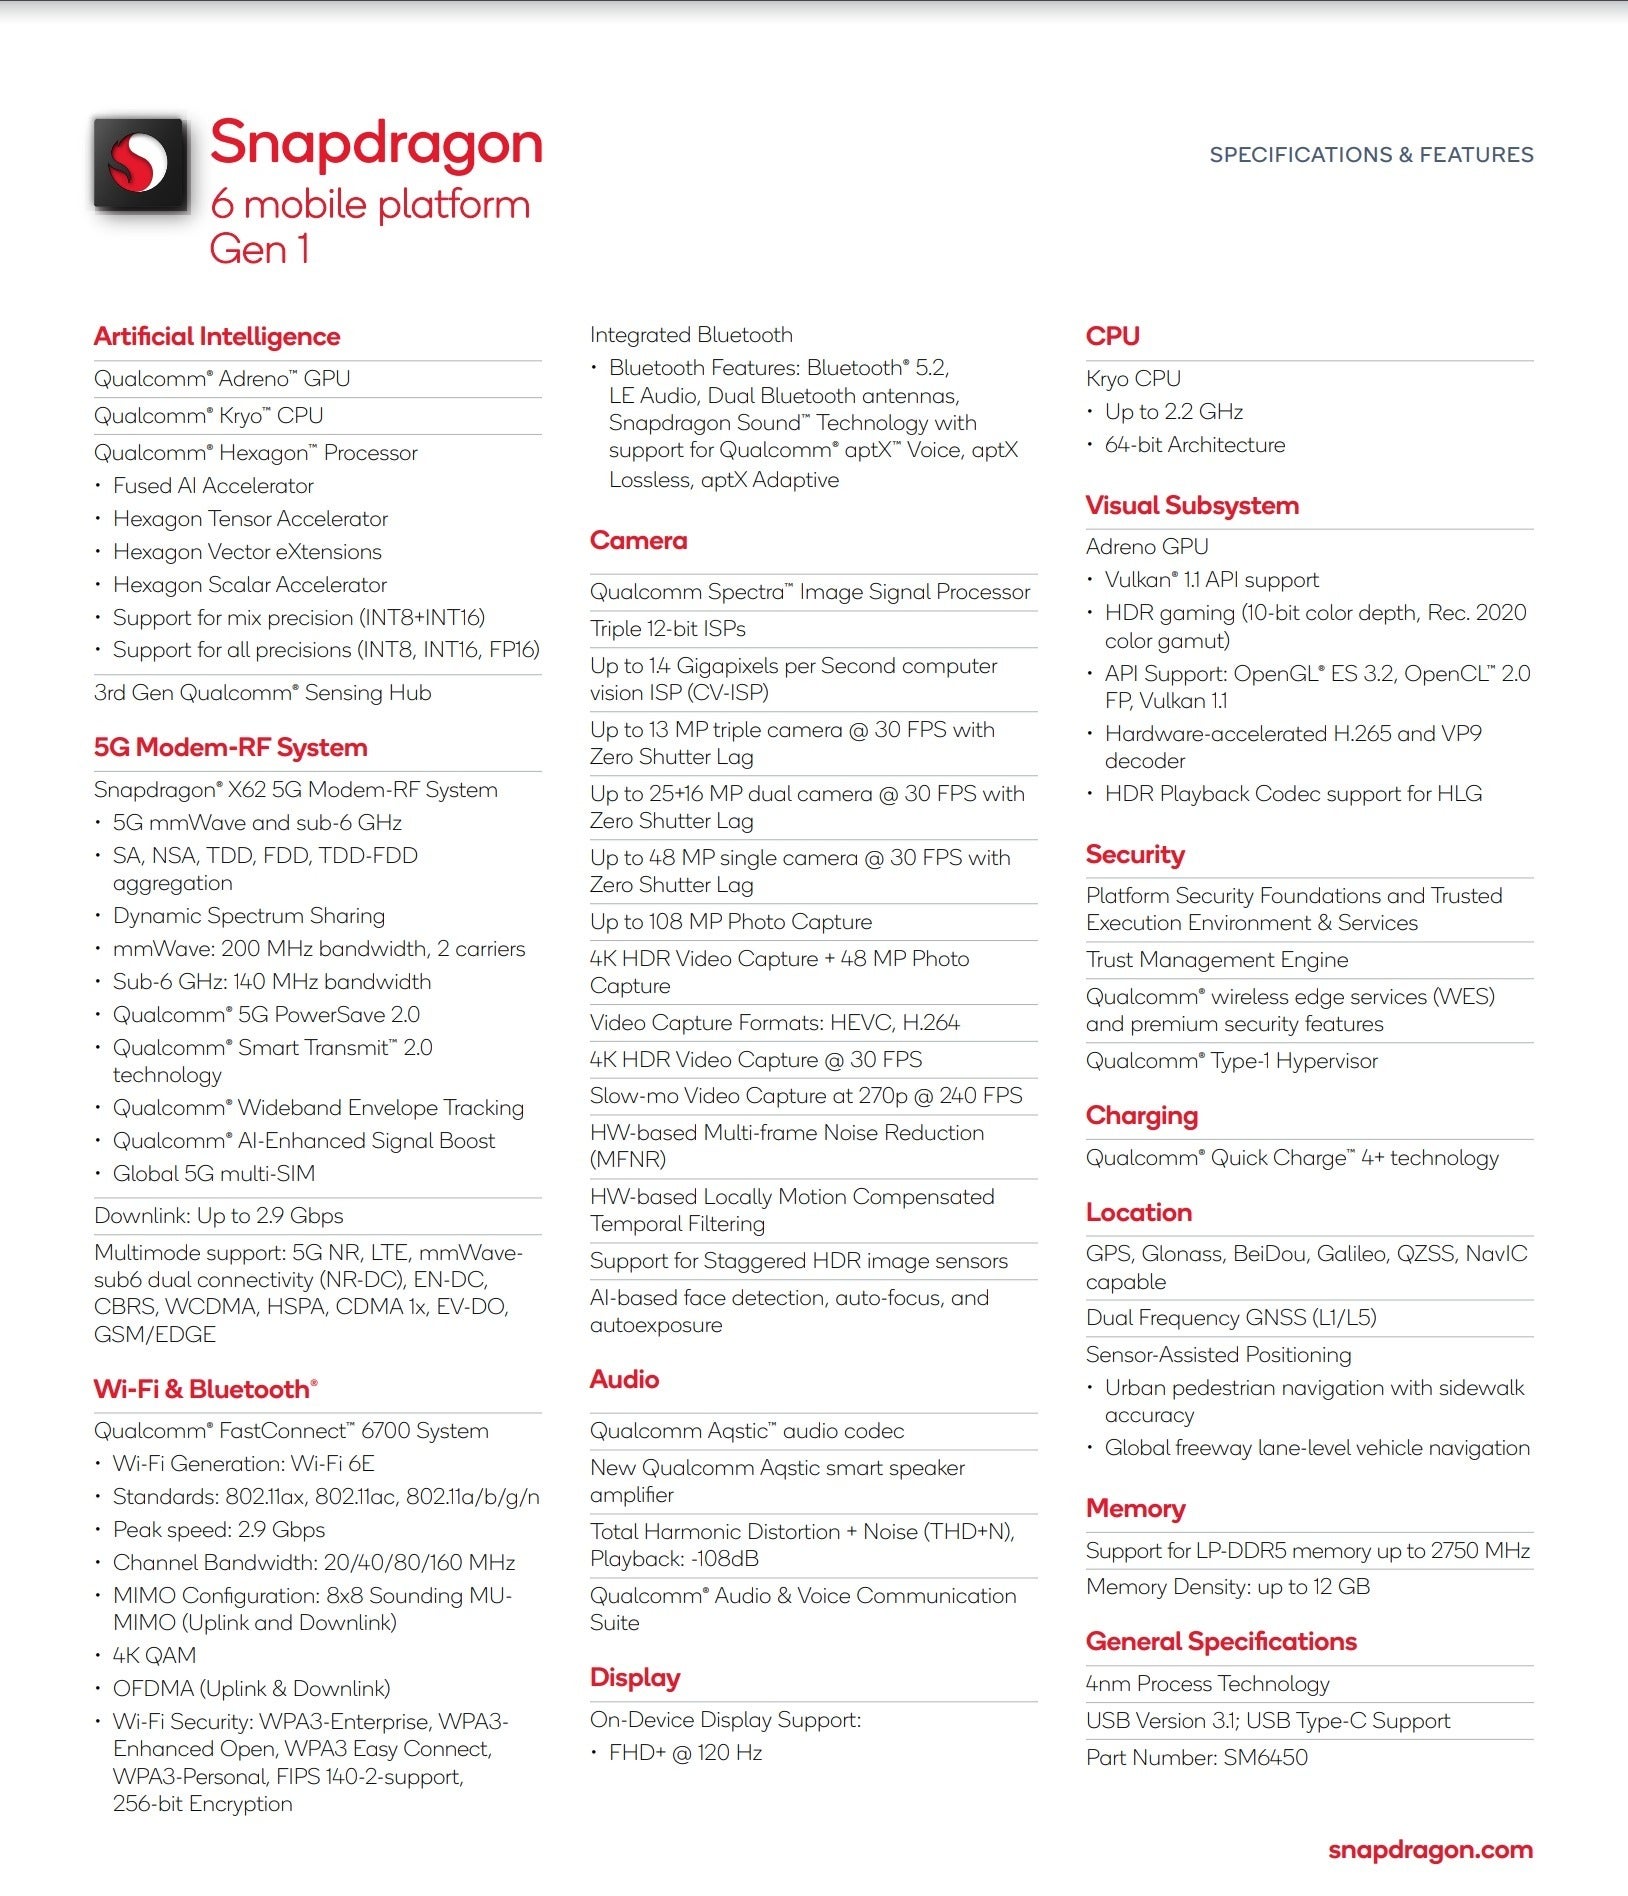 Snapdragon 6 Gen 1 specs - While Apple stays iPhone 14 on A15, midrange Androids are getting 4nm Snapdragon 6 horsepower